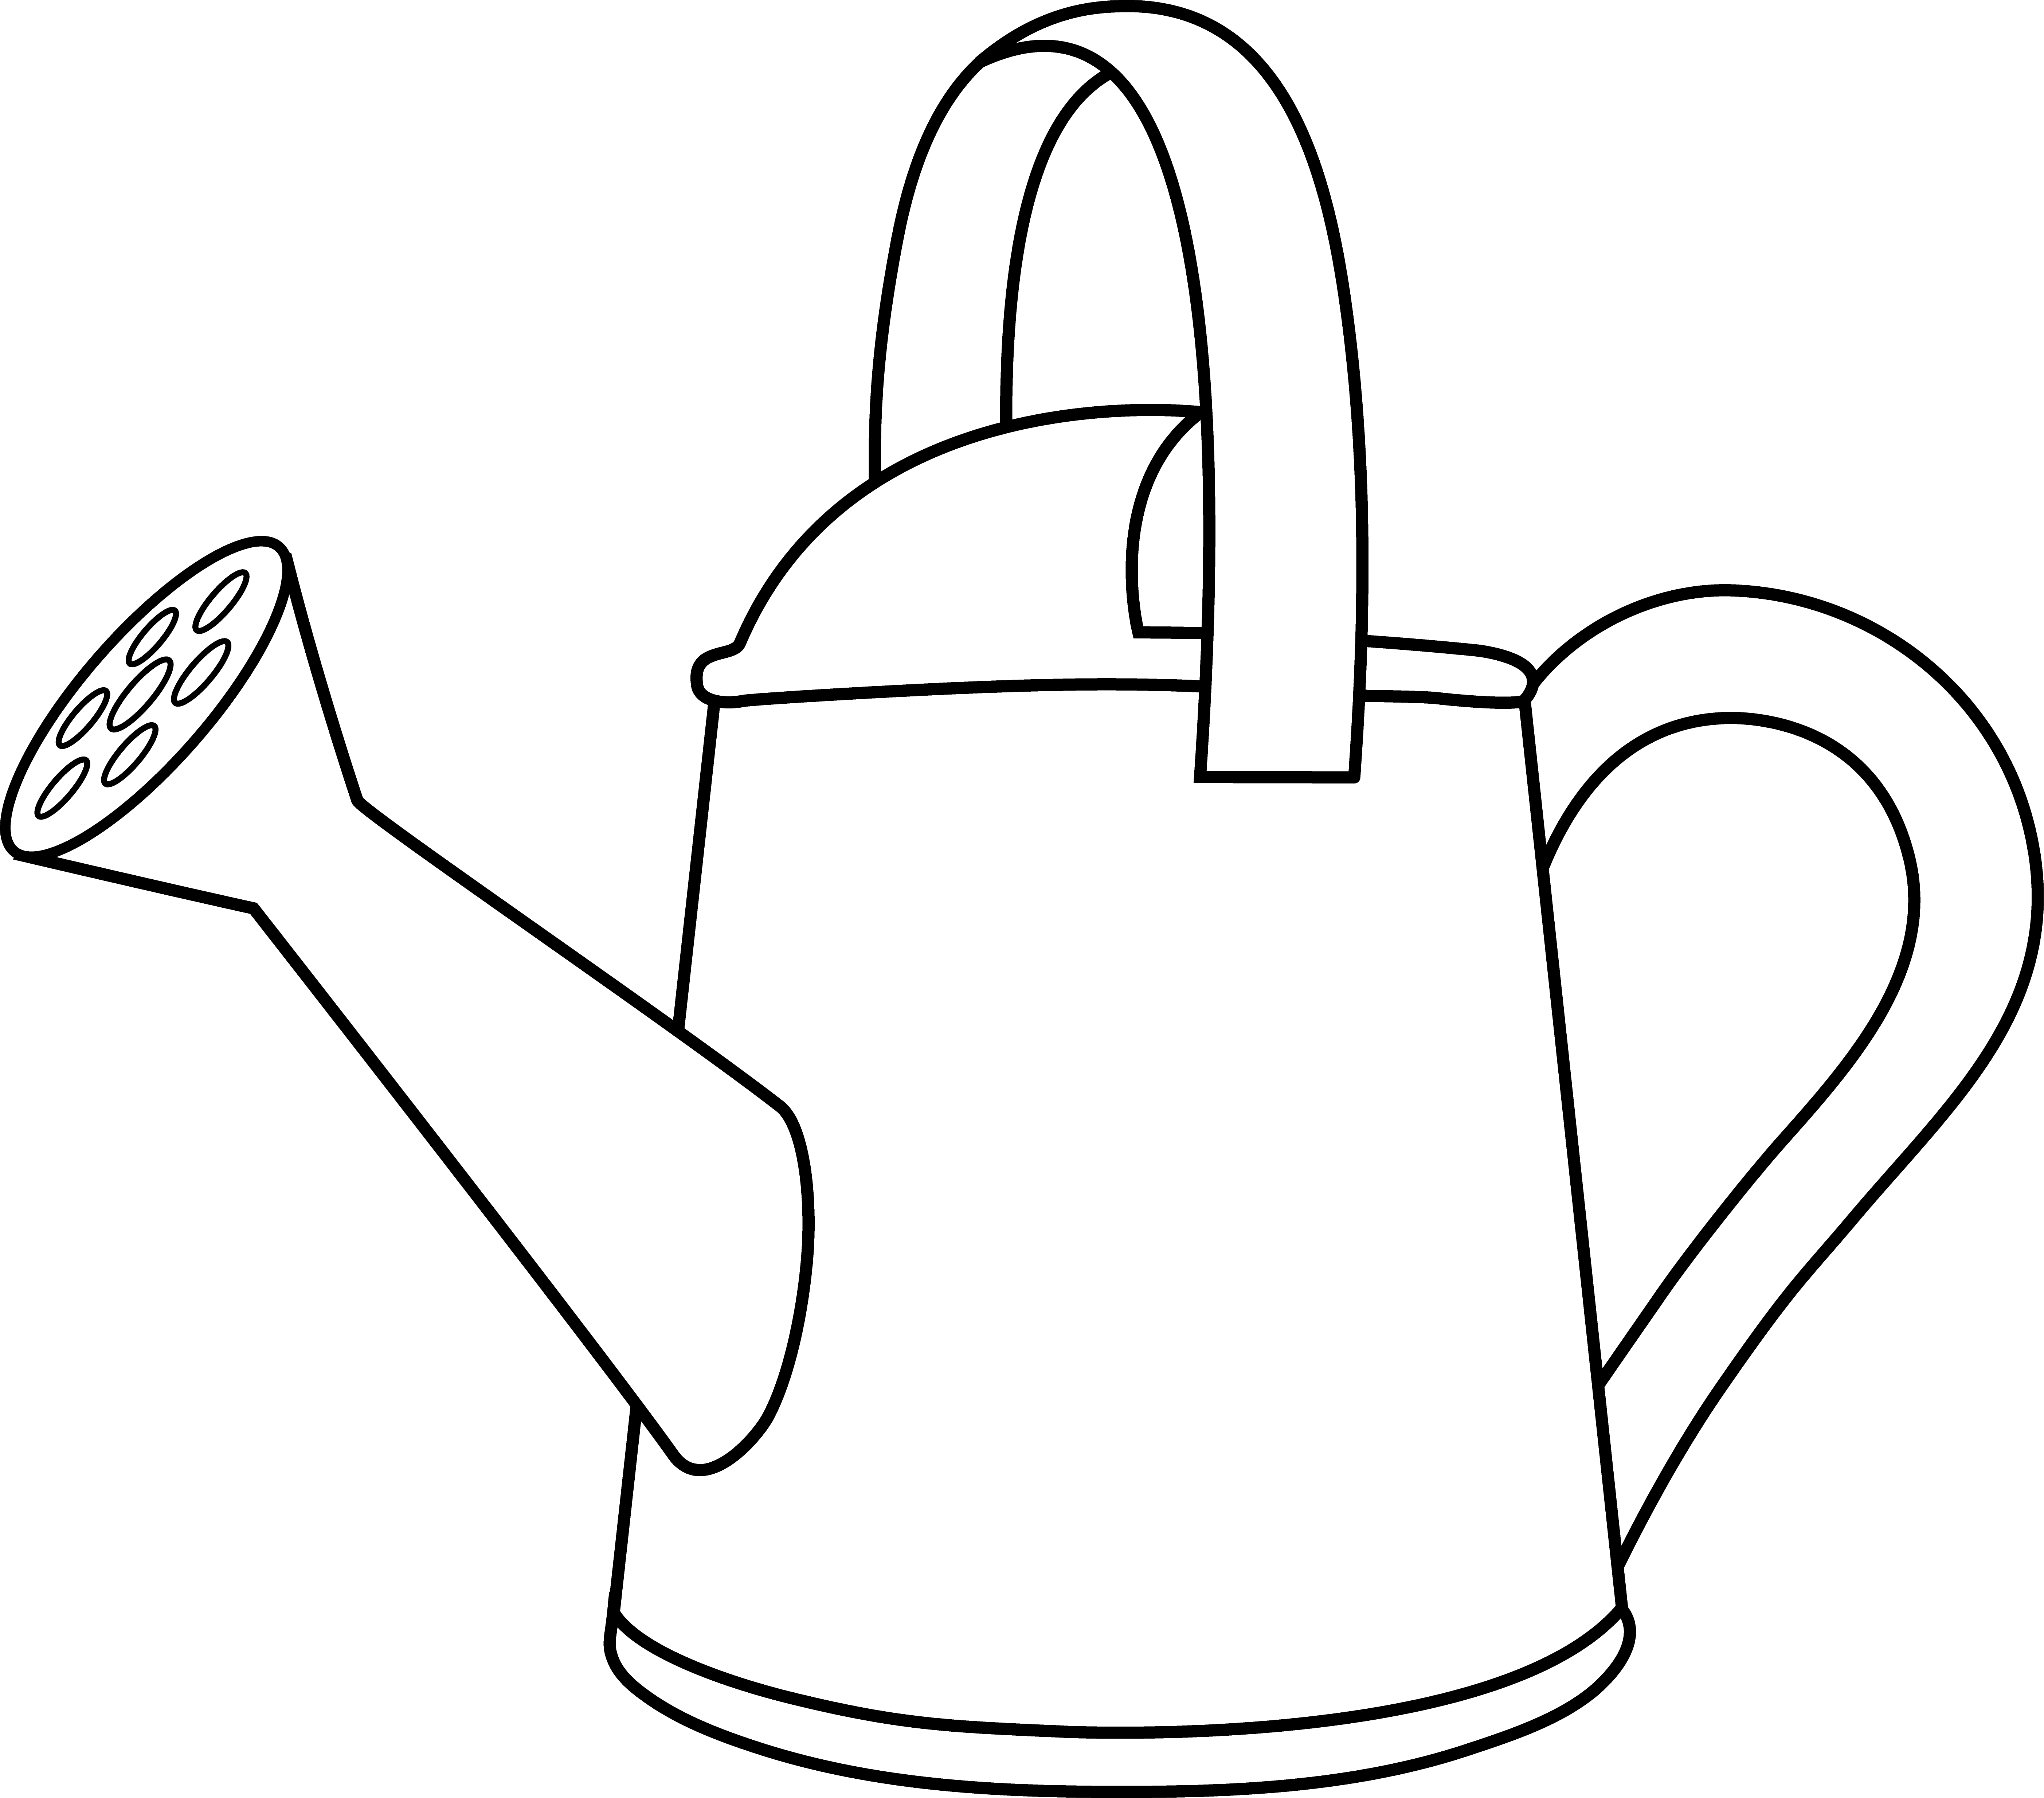 Colorable Watering Can Outline - Free Clip Art